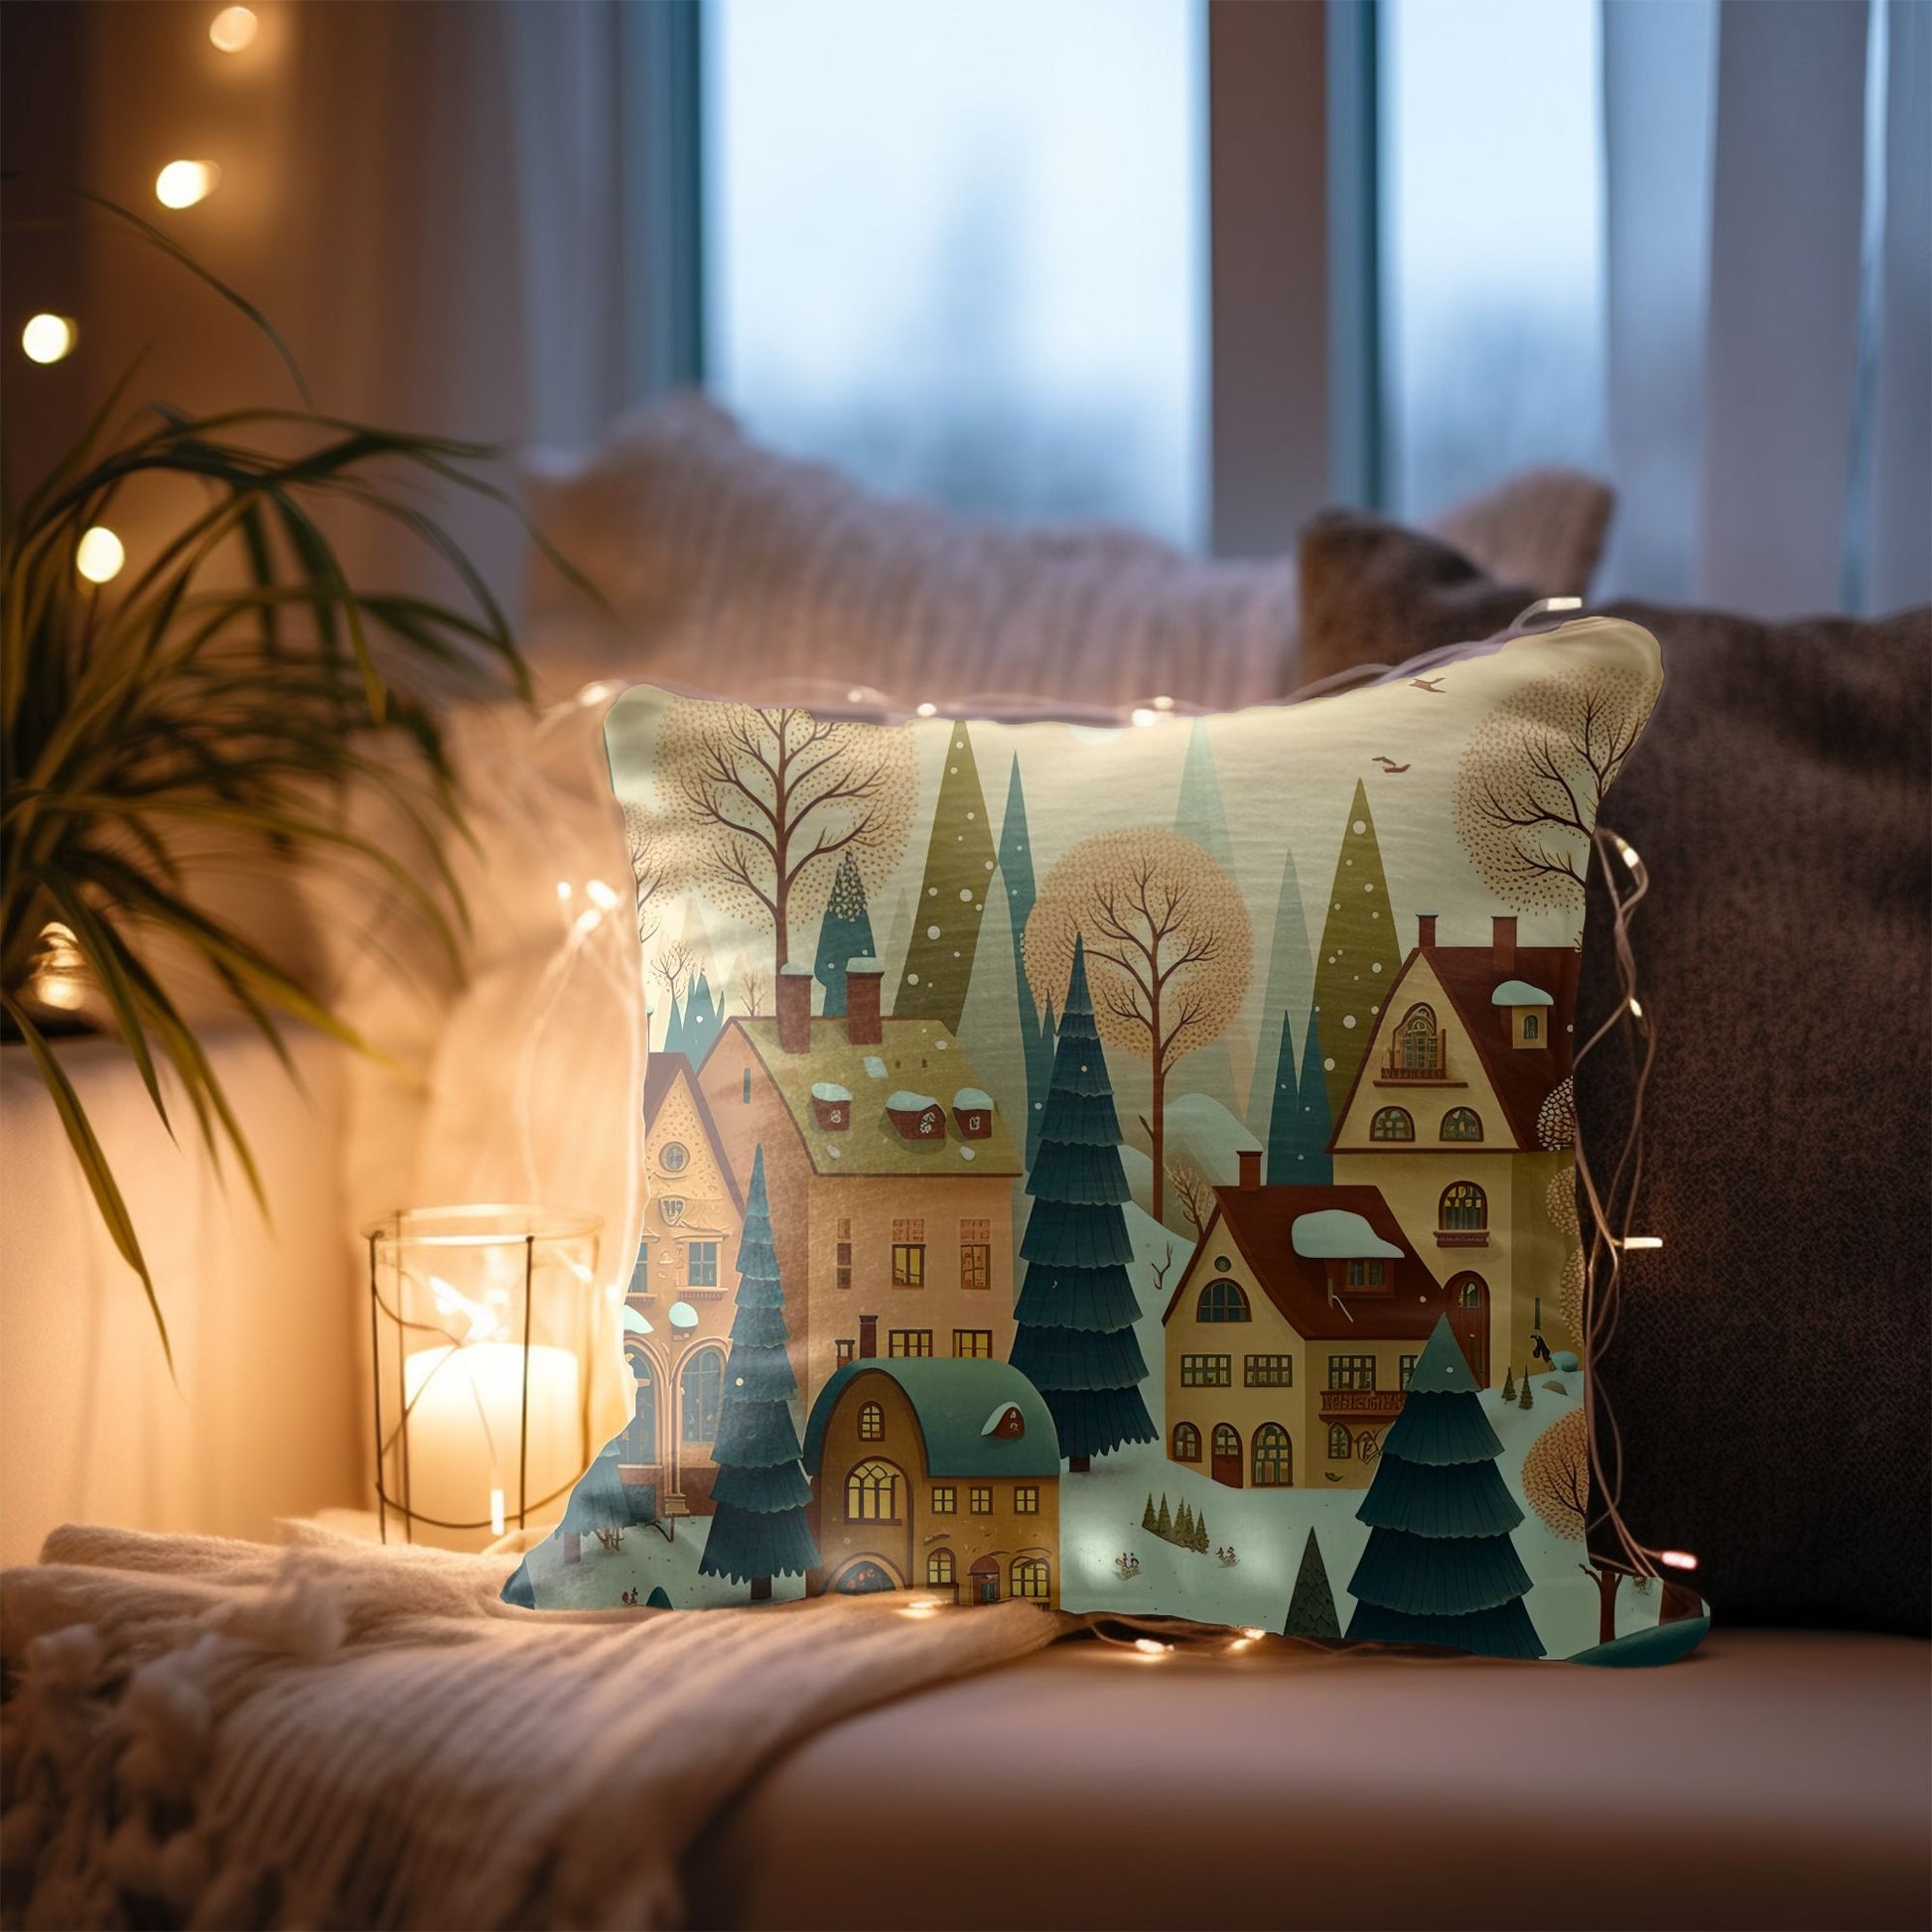 Whimsical Christmas Village Illustration on the Pillow